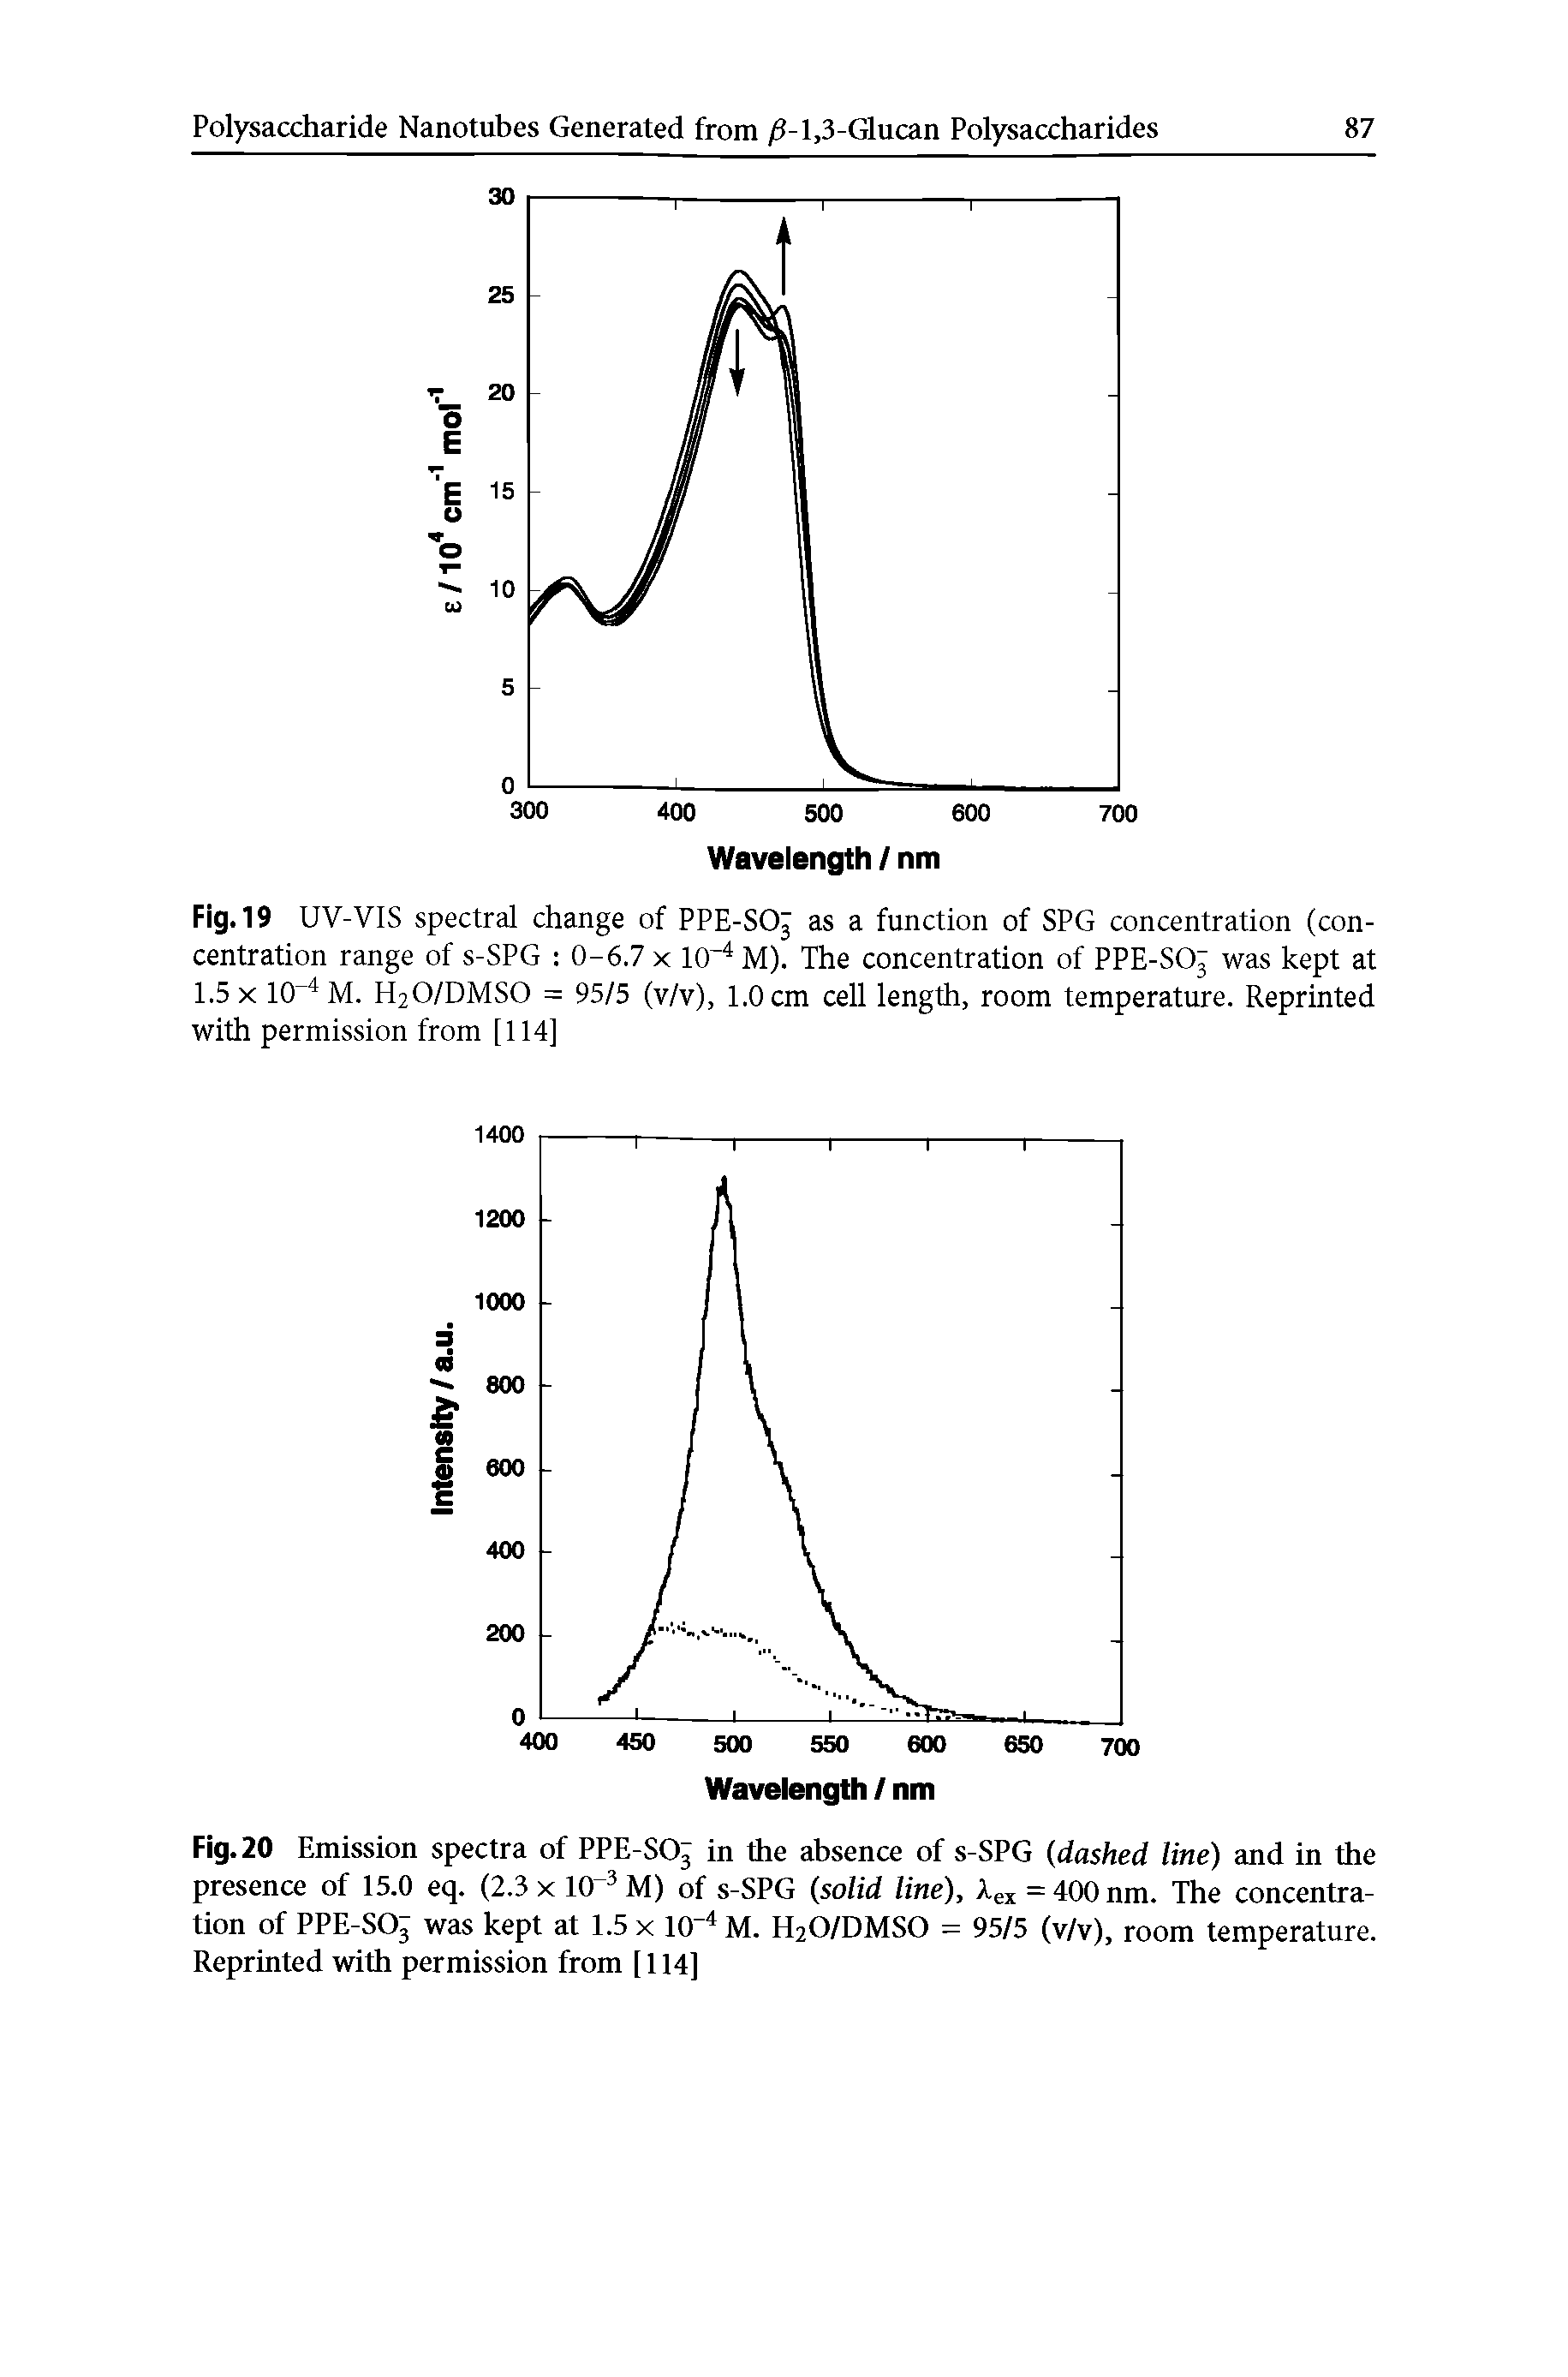 Fig. 19 UV-VIS spectral change of PPE-SOj as a function of SPG concentration (concentration range of s-SPG 0-6.7 x 10 M). The concentration of PPE-SOj was kept at 1.5 X 10 M. H2O/DMSO = 95/5 (v/v), 1.0 cm cell length, room temperature. Reprinted with permission from [114]...